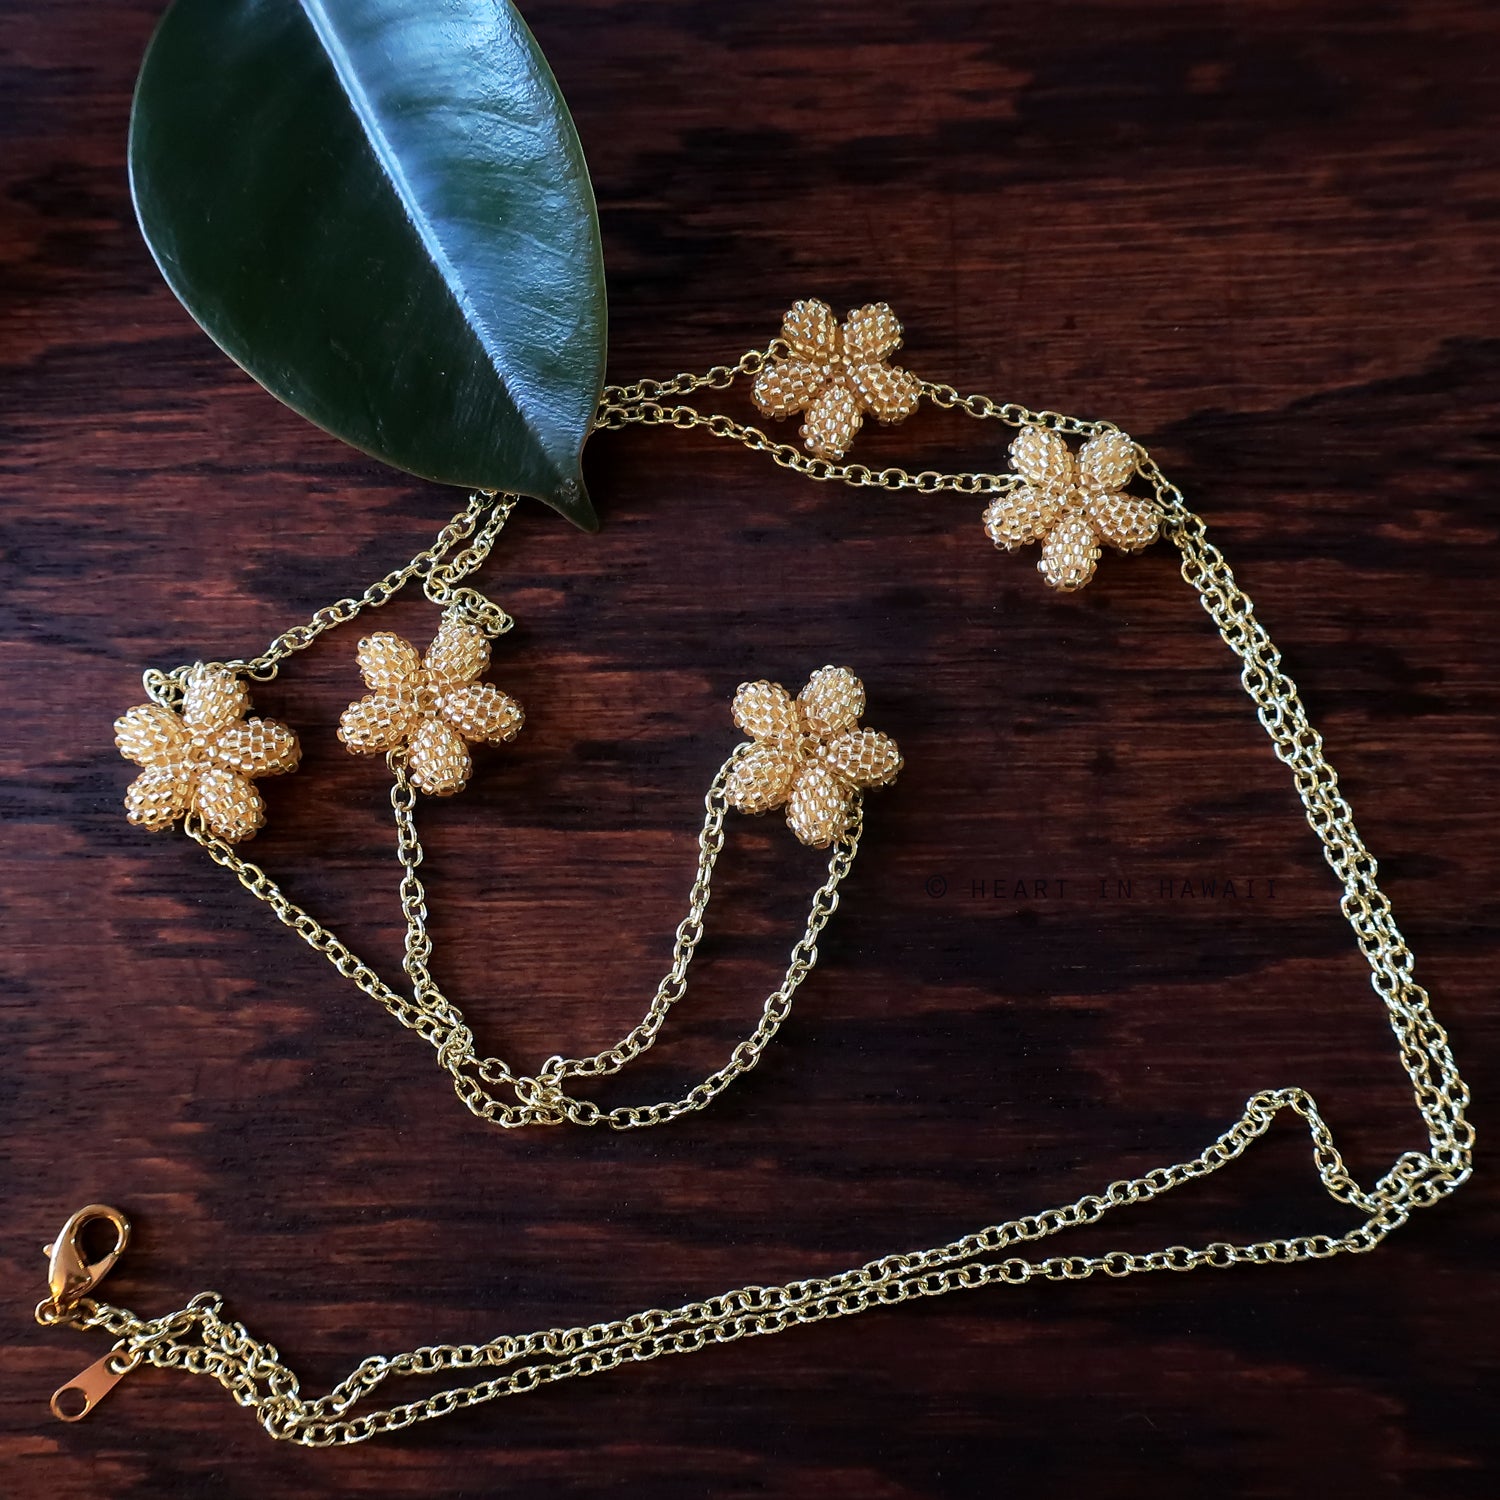 Heart in Hawaii Lei Flower Necklace - 5 Plumeria on 36-inch extra long Chain